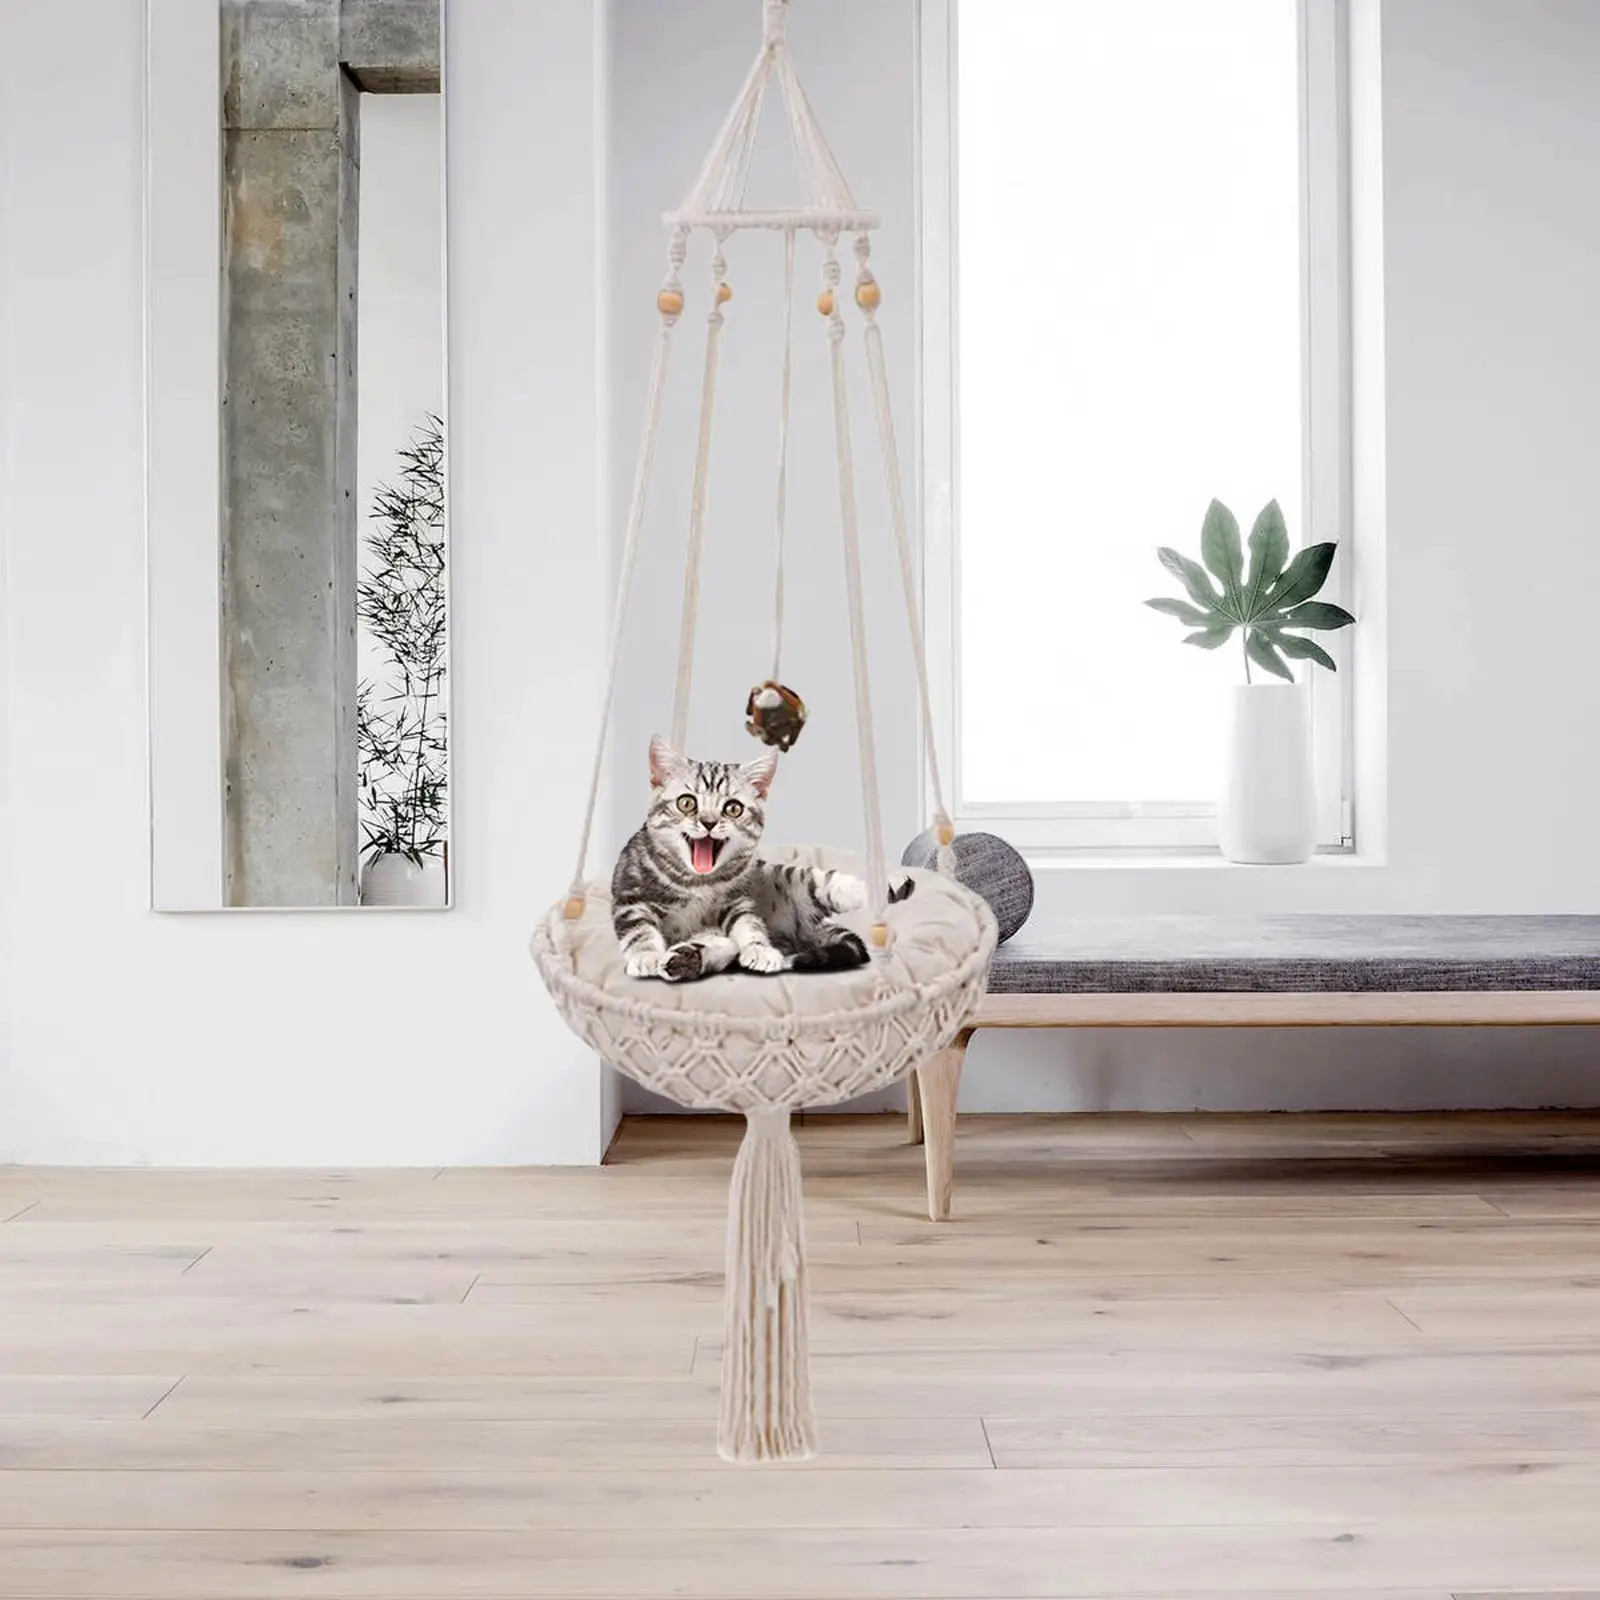 Cat Hammock Handwoven Bohemian Swing Bed with Cushion Hanging Perch Winter Blanket Toy for Basking Home Bedroom Decoration